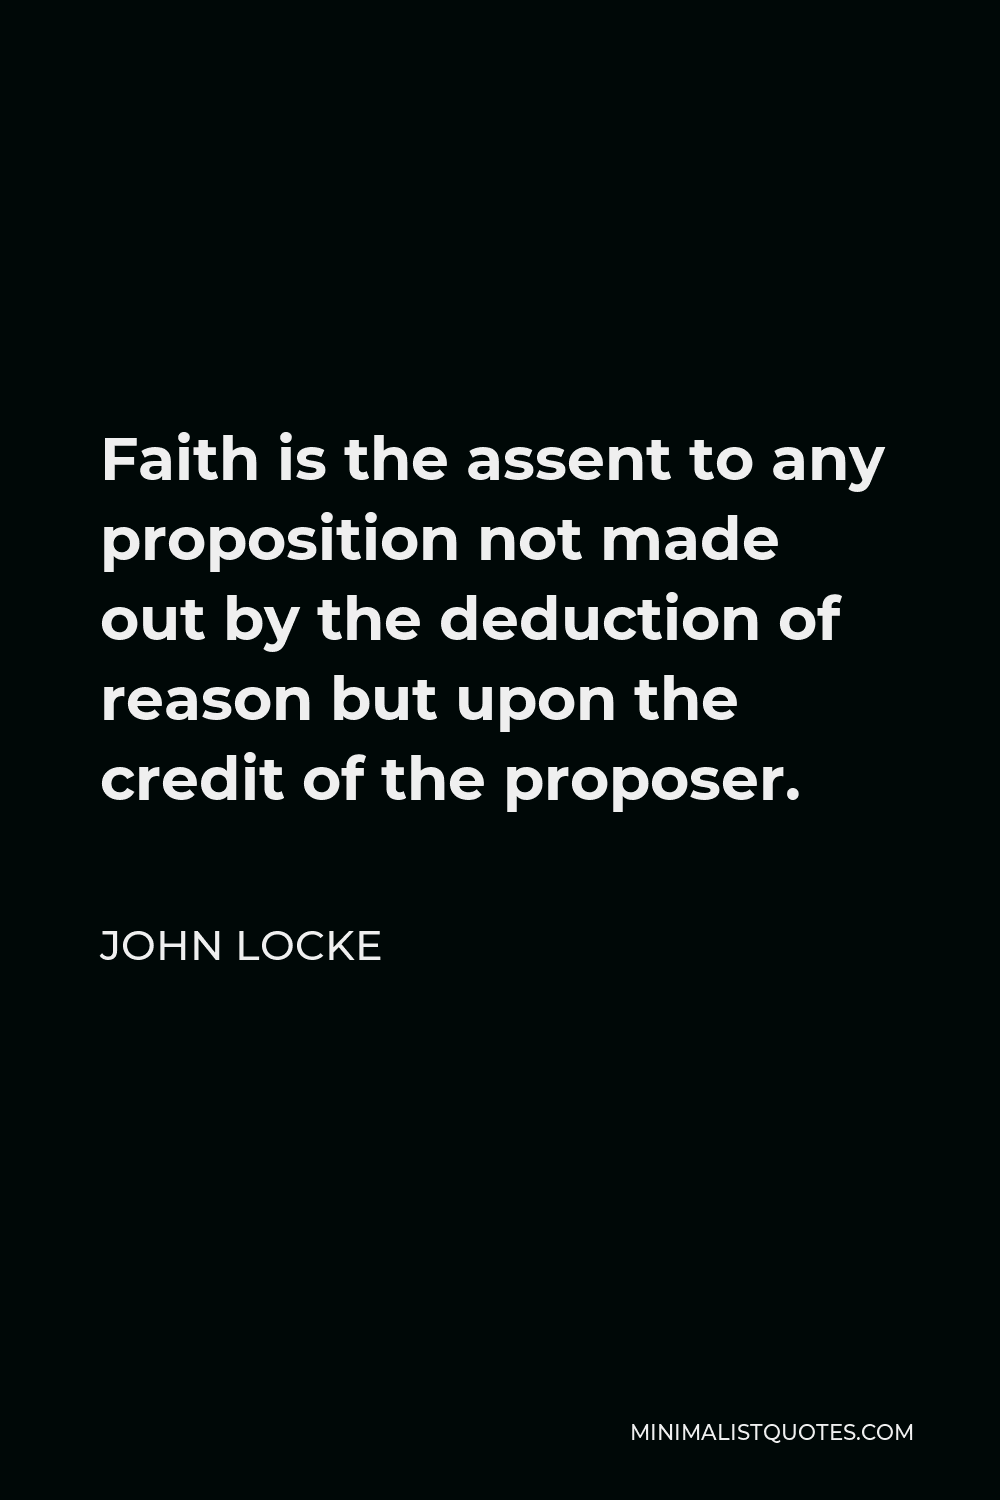 John Locke Quote - Faith is the assent to any proposition not made out by the deduction of reason but upon the credit of the proposer.